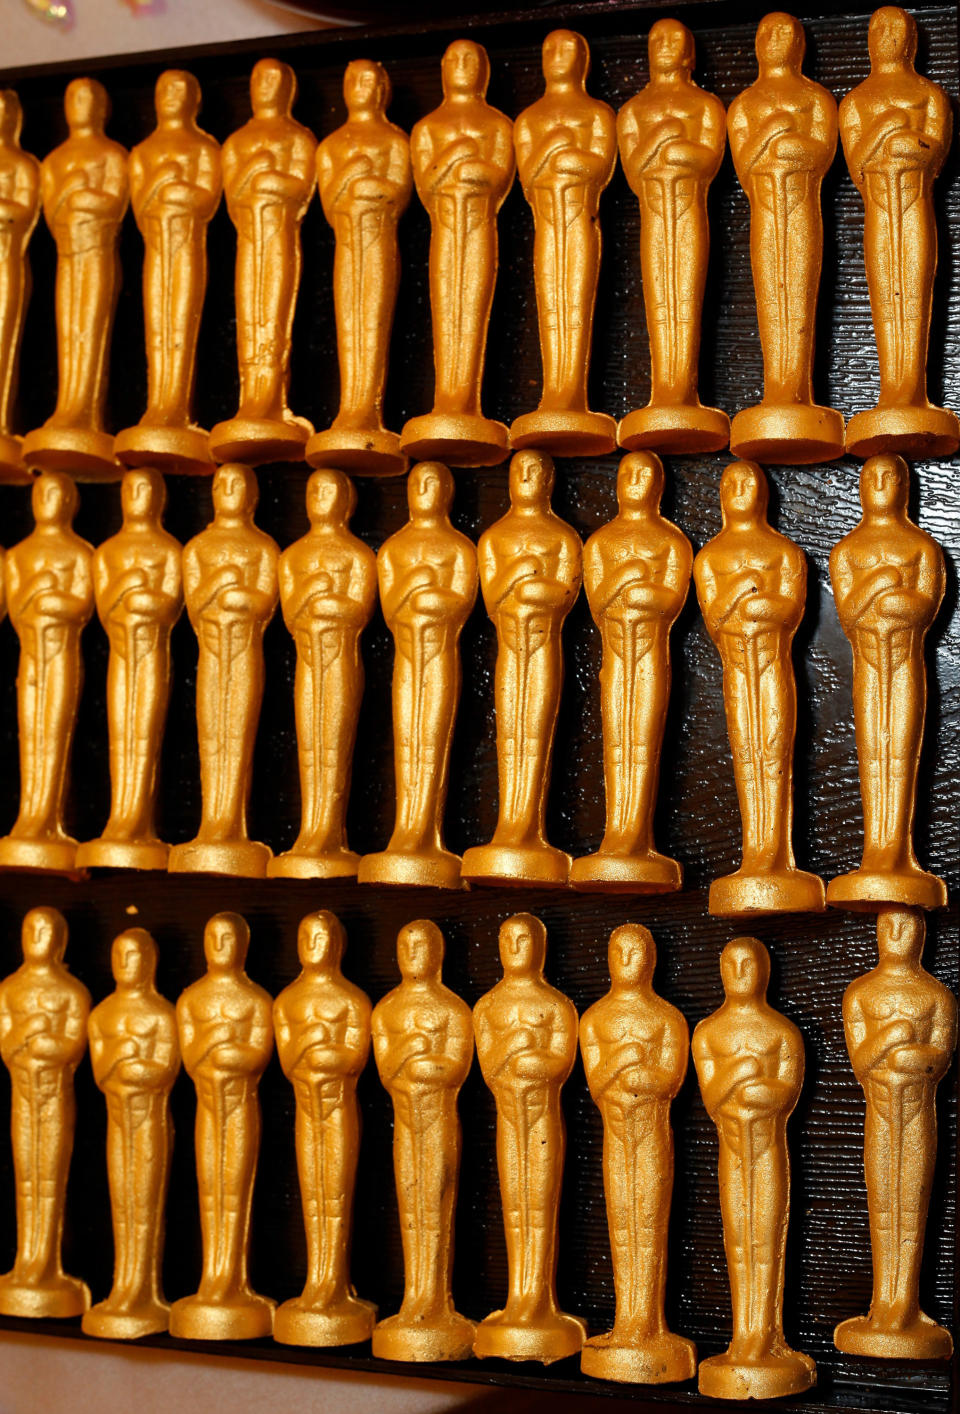 Master Chef Wolfgang Puck's 24 Karat Chocolate Oscars are displayed for the 84th Annual Academy Awards Governors Ball at the Oscar food and beverage preview at the Kodak Theatre in Los Angeles on Thursday, Feb. 23, 2012. (AP Photo/Damian Dovarganes)